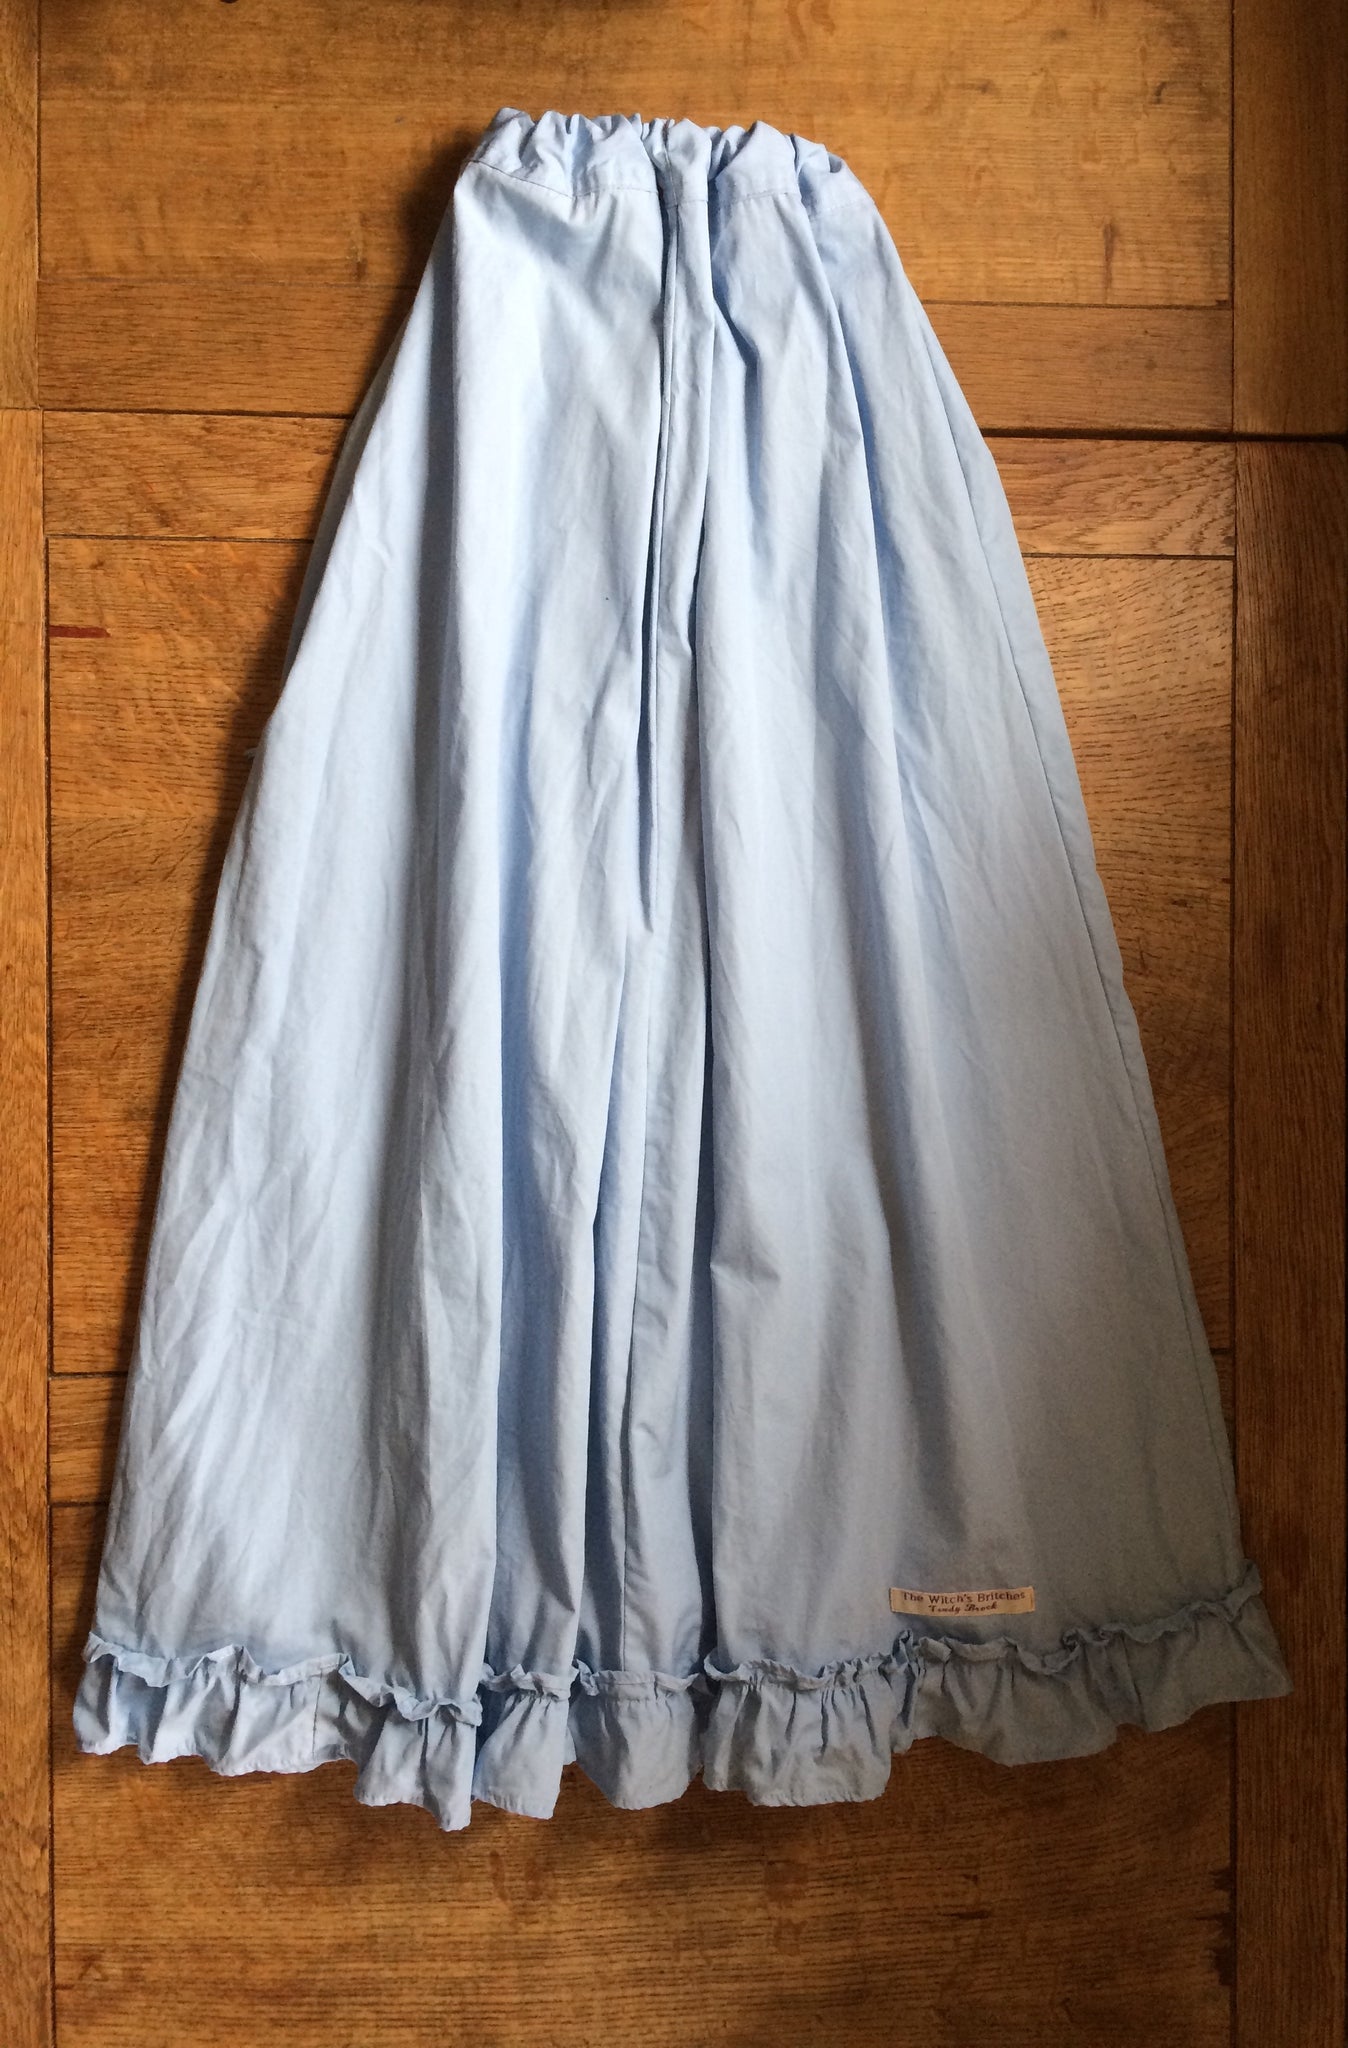 Sky blue long cotton petticoat (38 waist) – The Witch's Britches